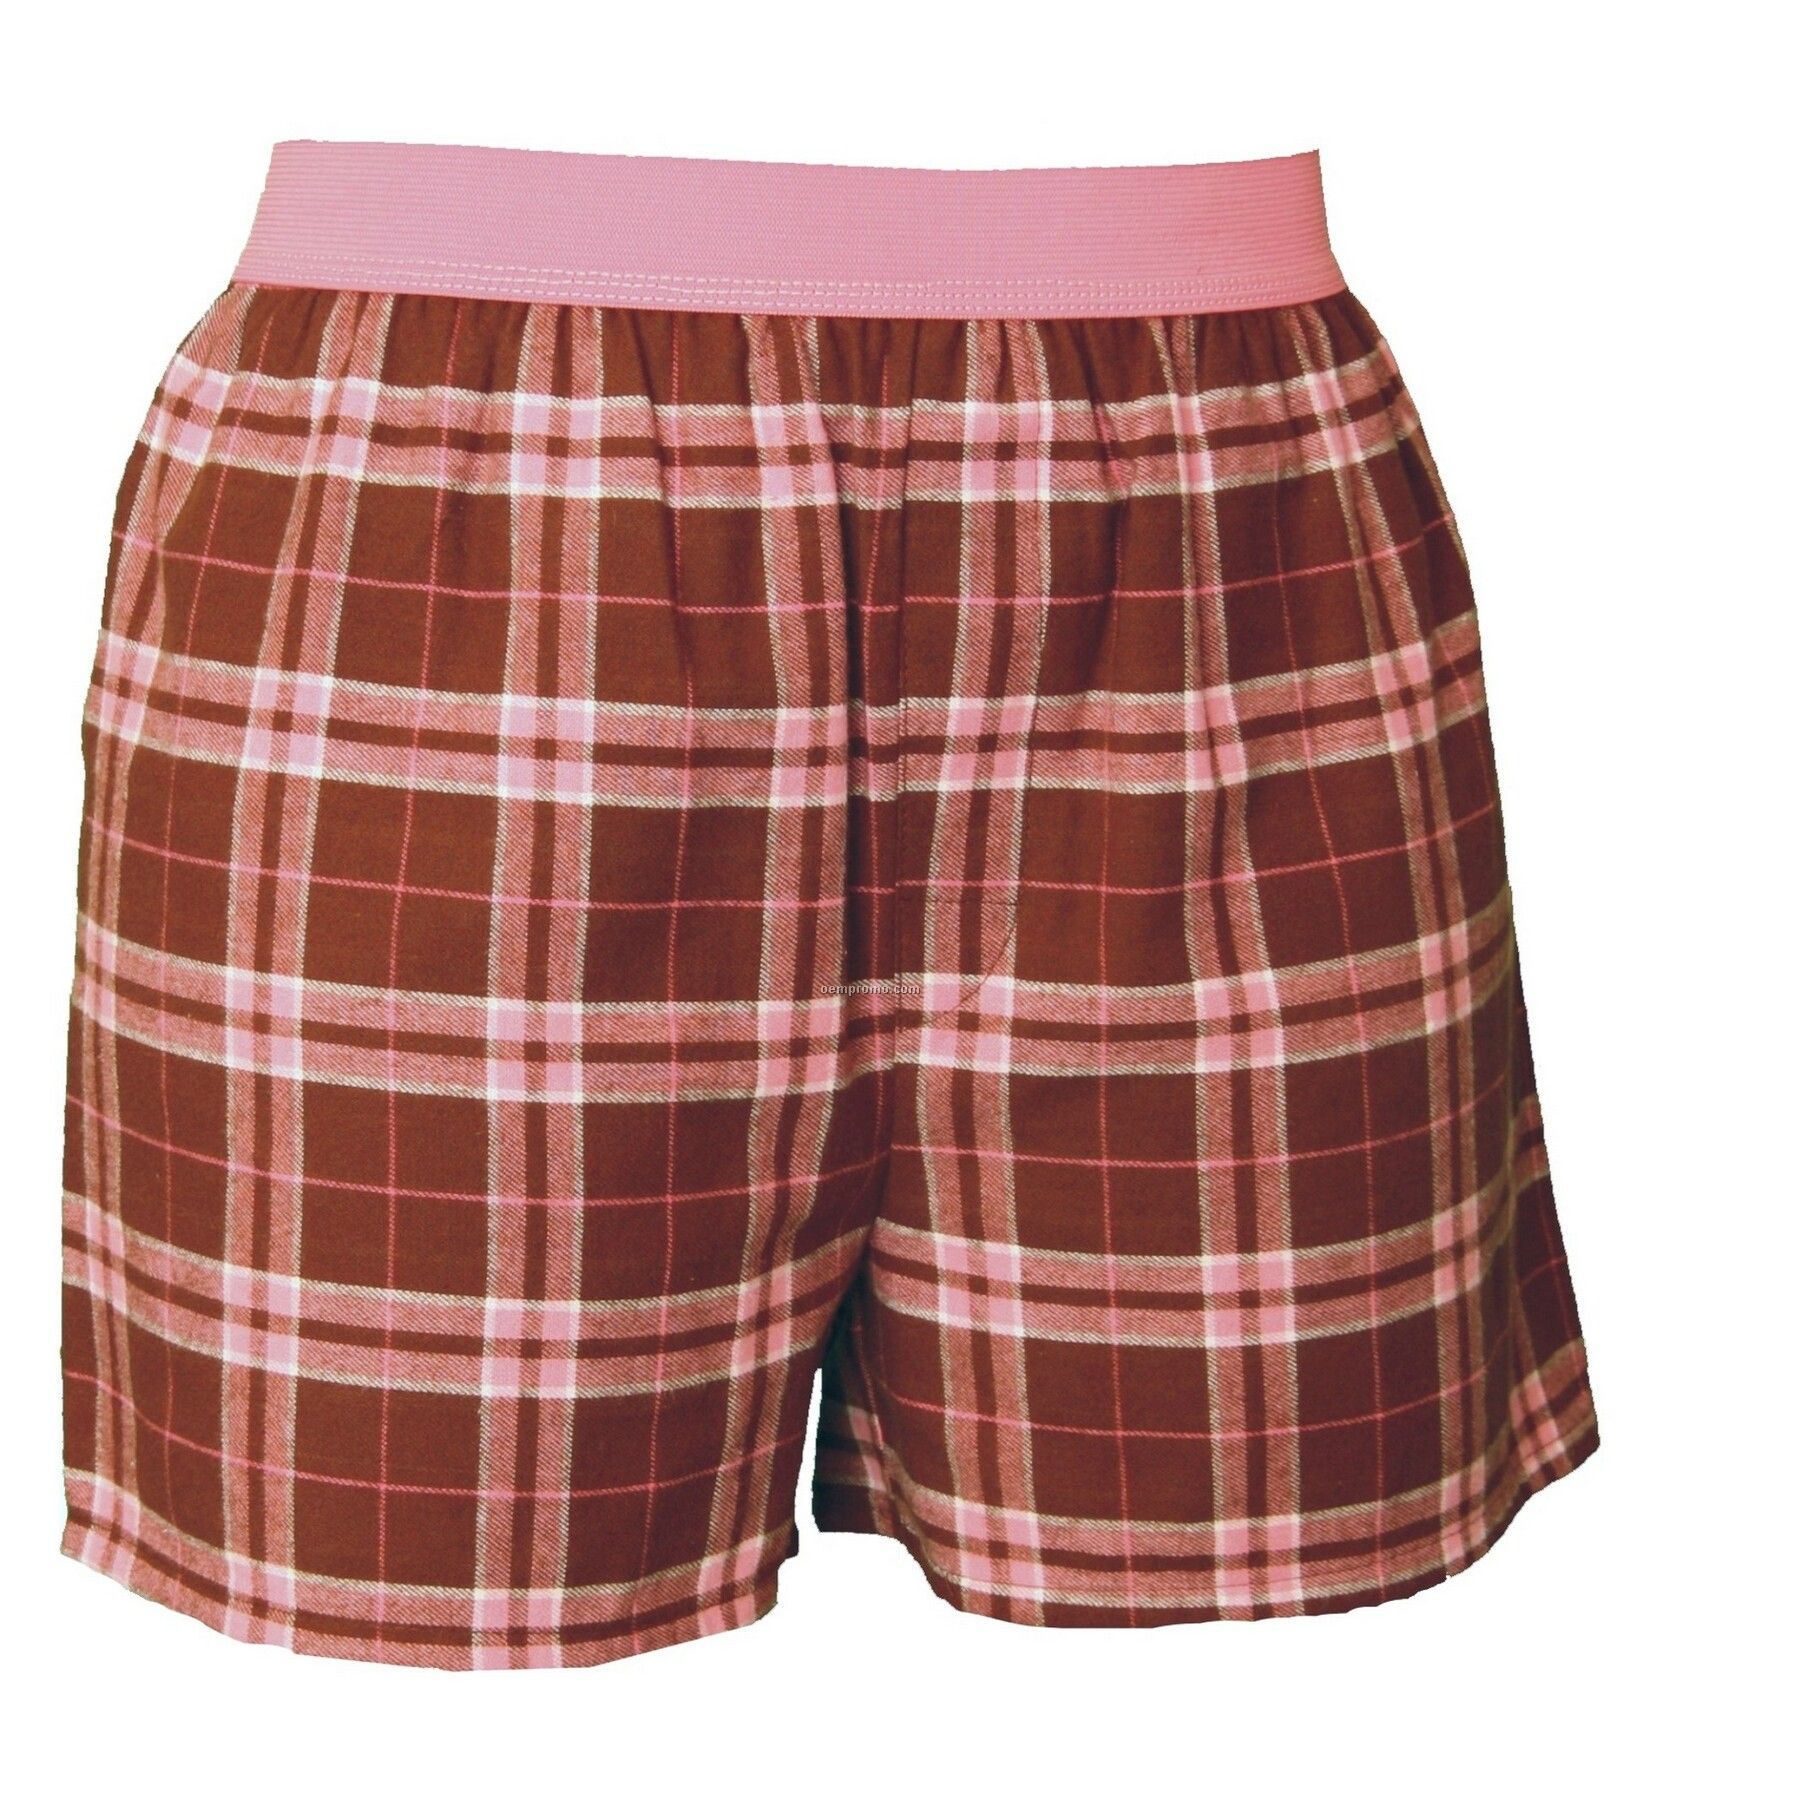 Adult Brown/Pink Plaid Classic Boxer Shorts